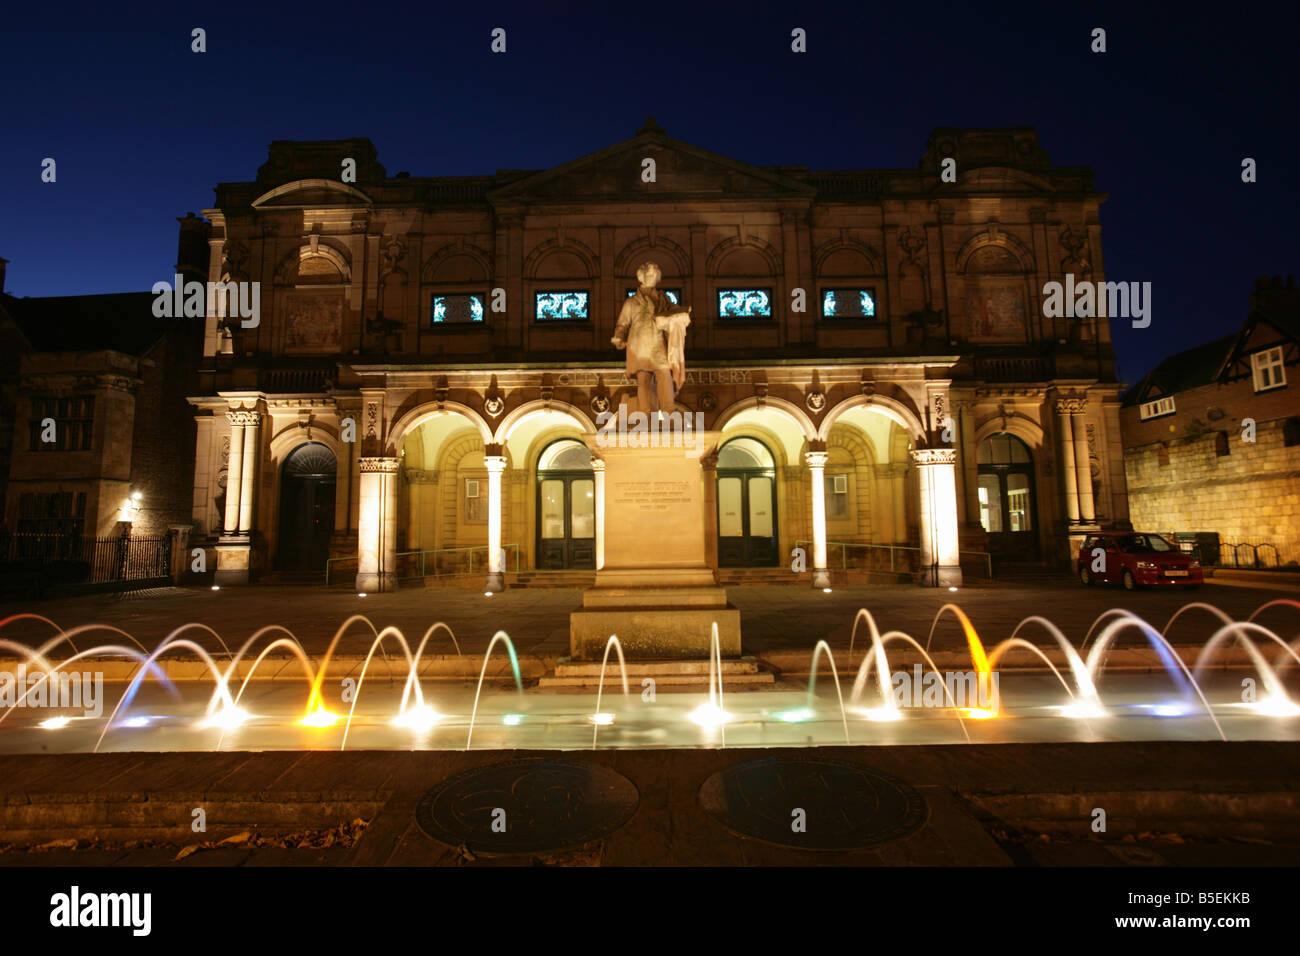 City of York, England. Night view of the William Etty statue and Edward Taylor designed York City Art Gallery. Stock Photo